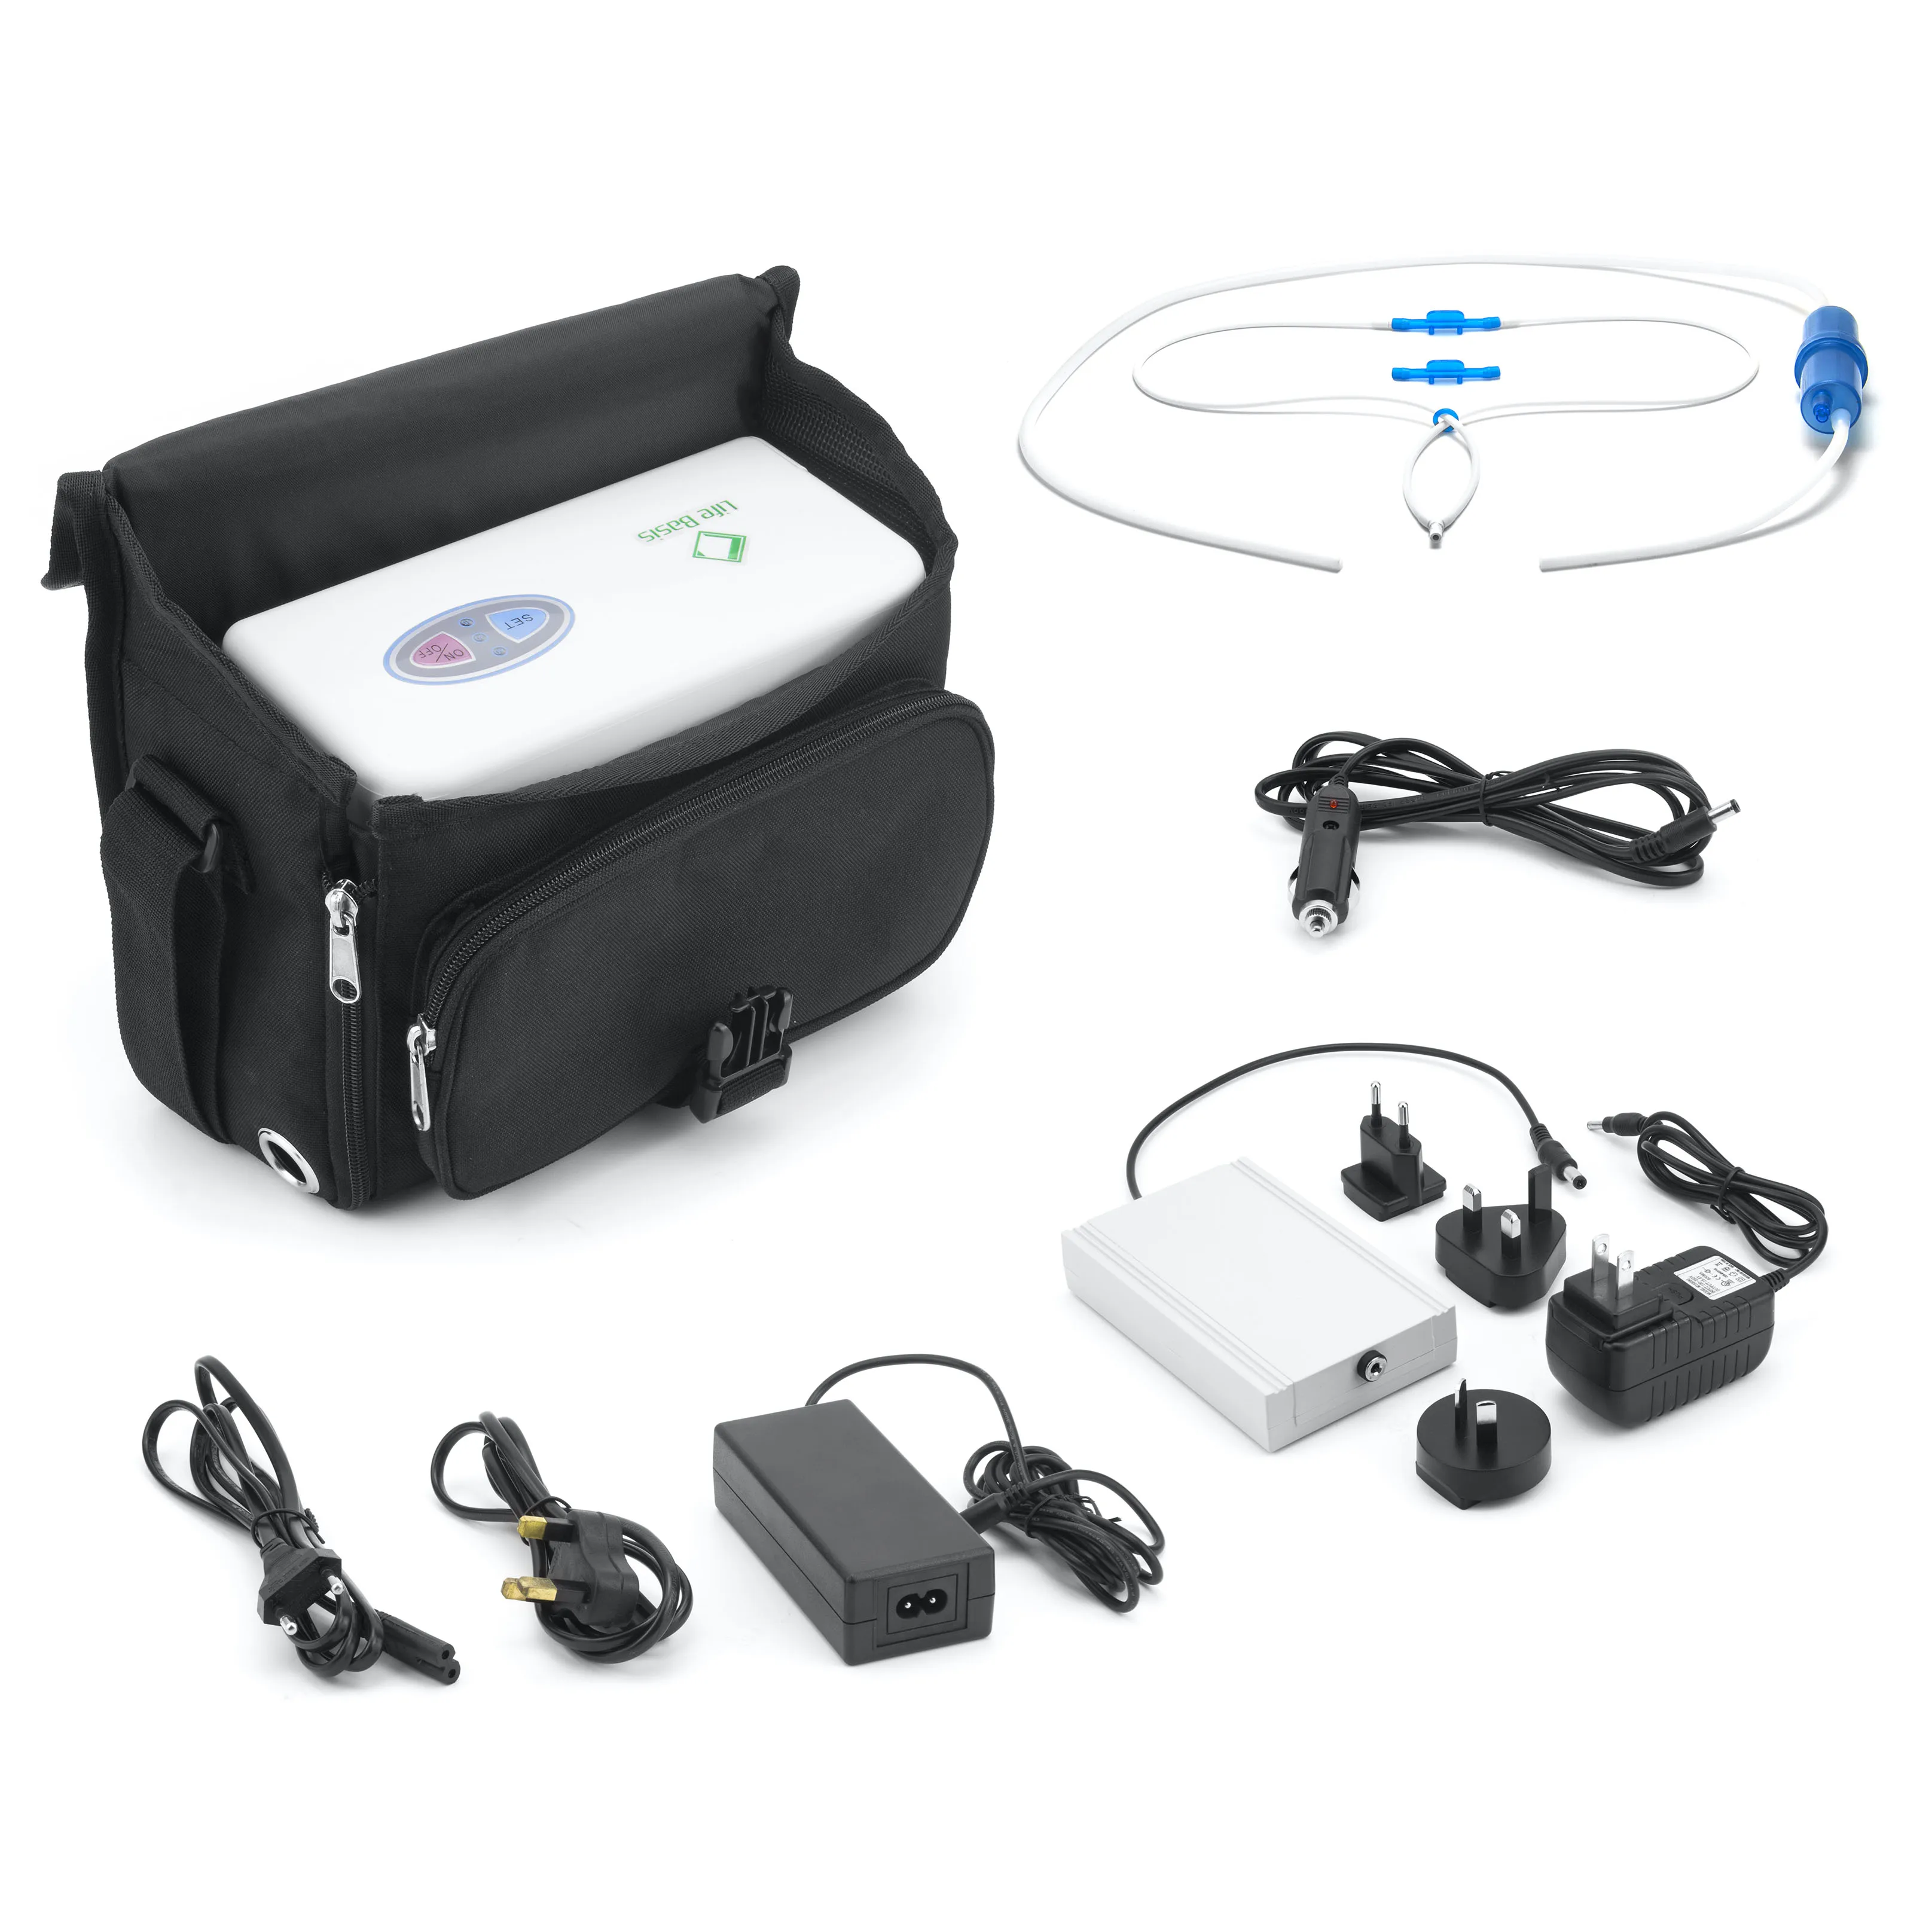  Oxygen Concentrator